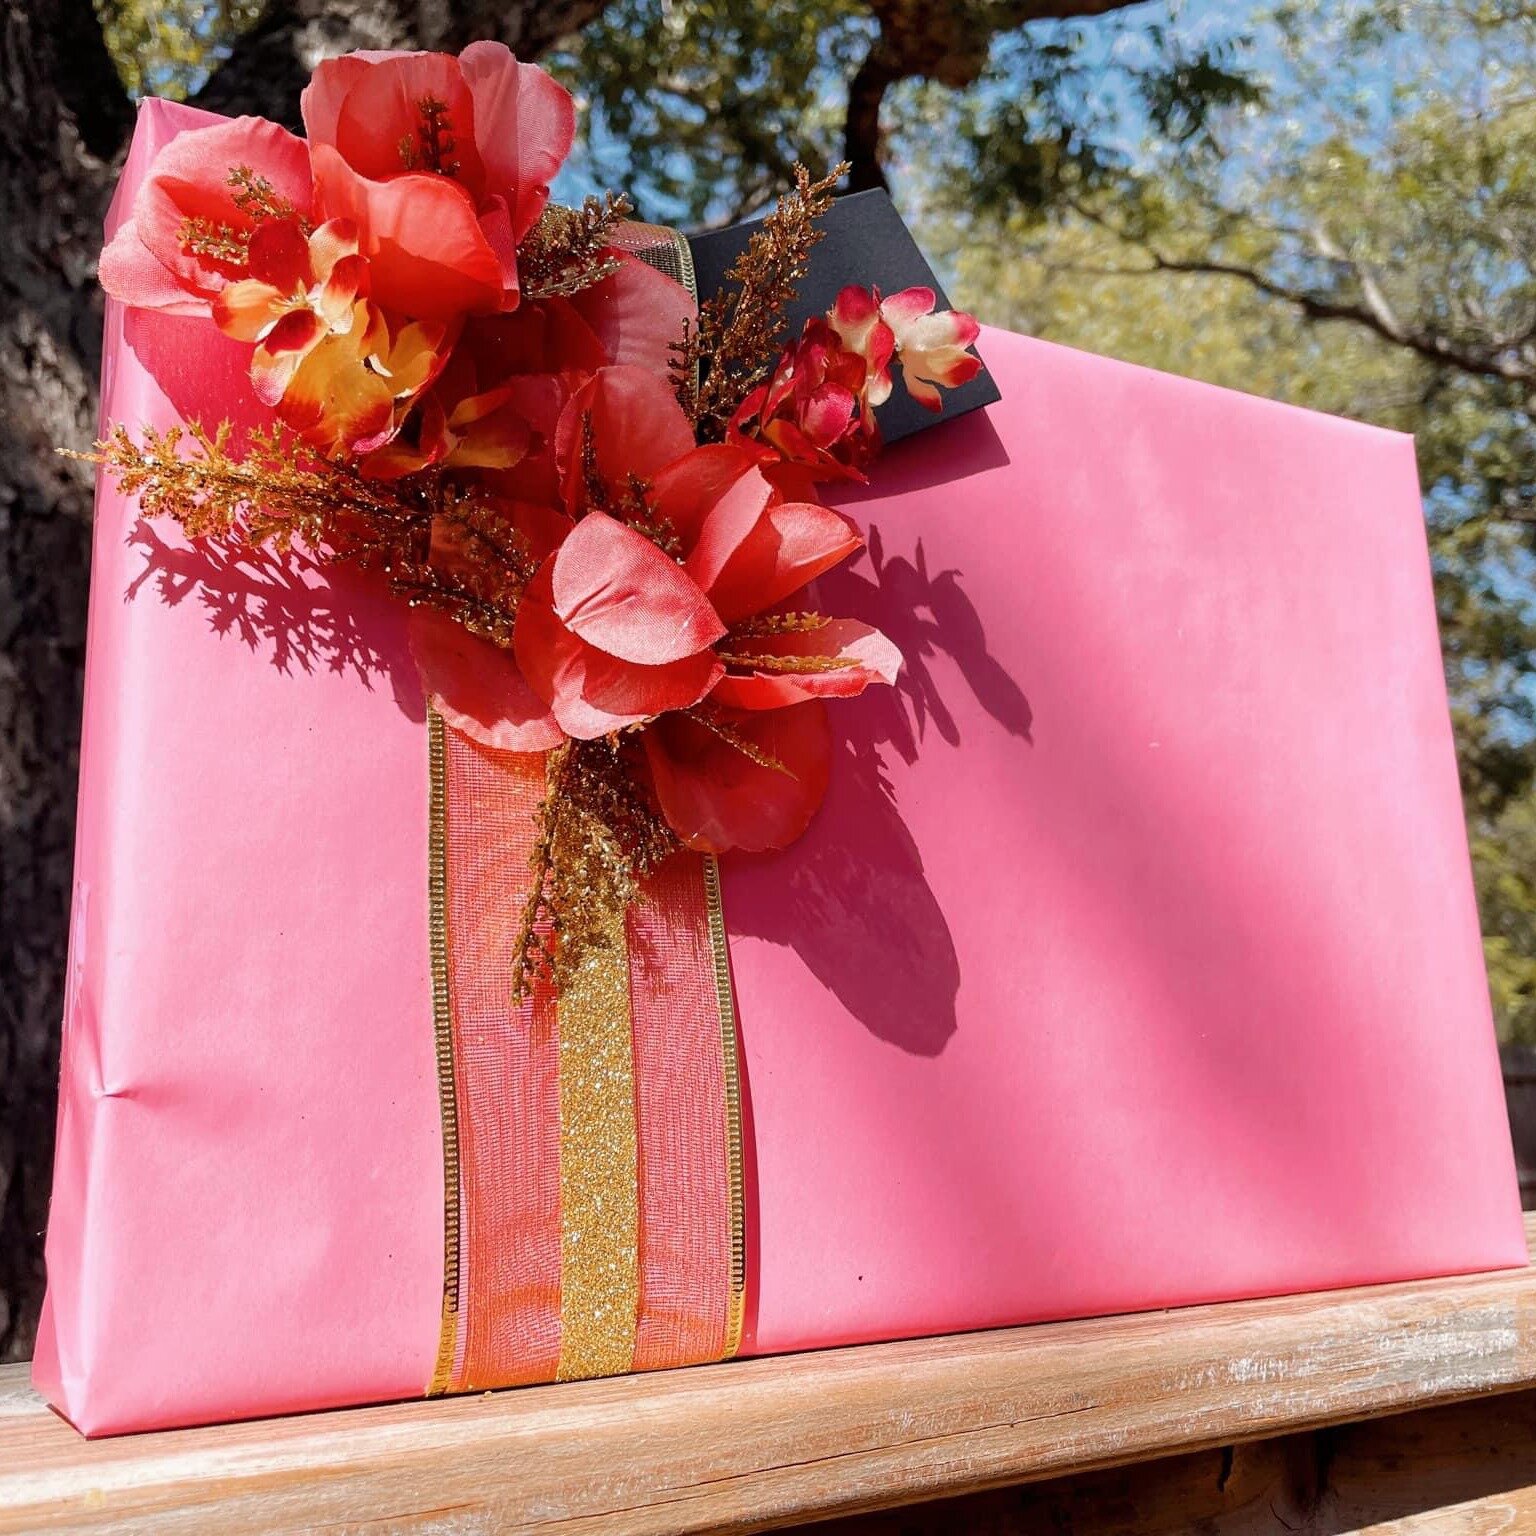 Meet @ruekgiftwrappingco  they are Johnson Counties best gift wrapping company! They will be with us this Sunday 2/19 so don't miss them!

#cleburnebridalshow #bridesandbeyondtx #historicdowntowncleburnetx #texaswedding #texasweddinginspo #weddingins